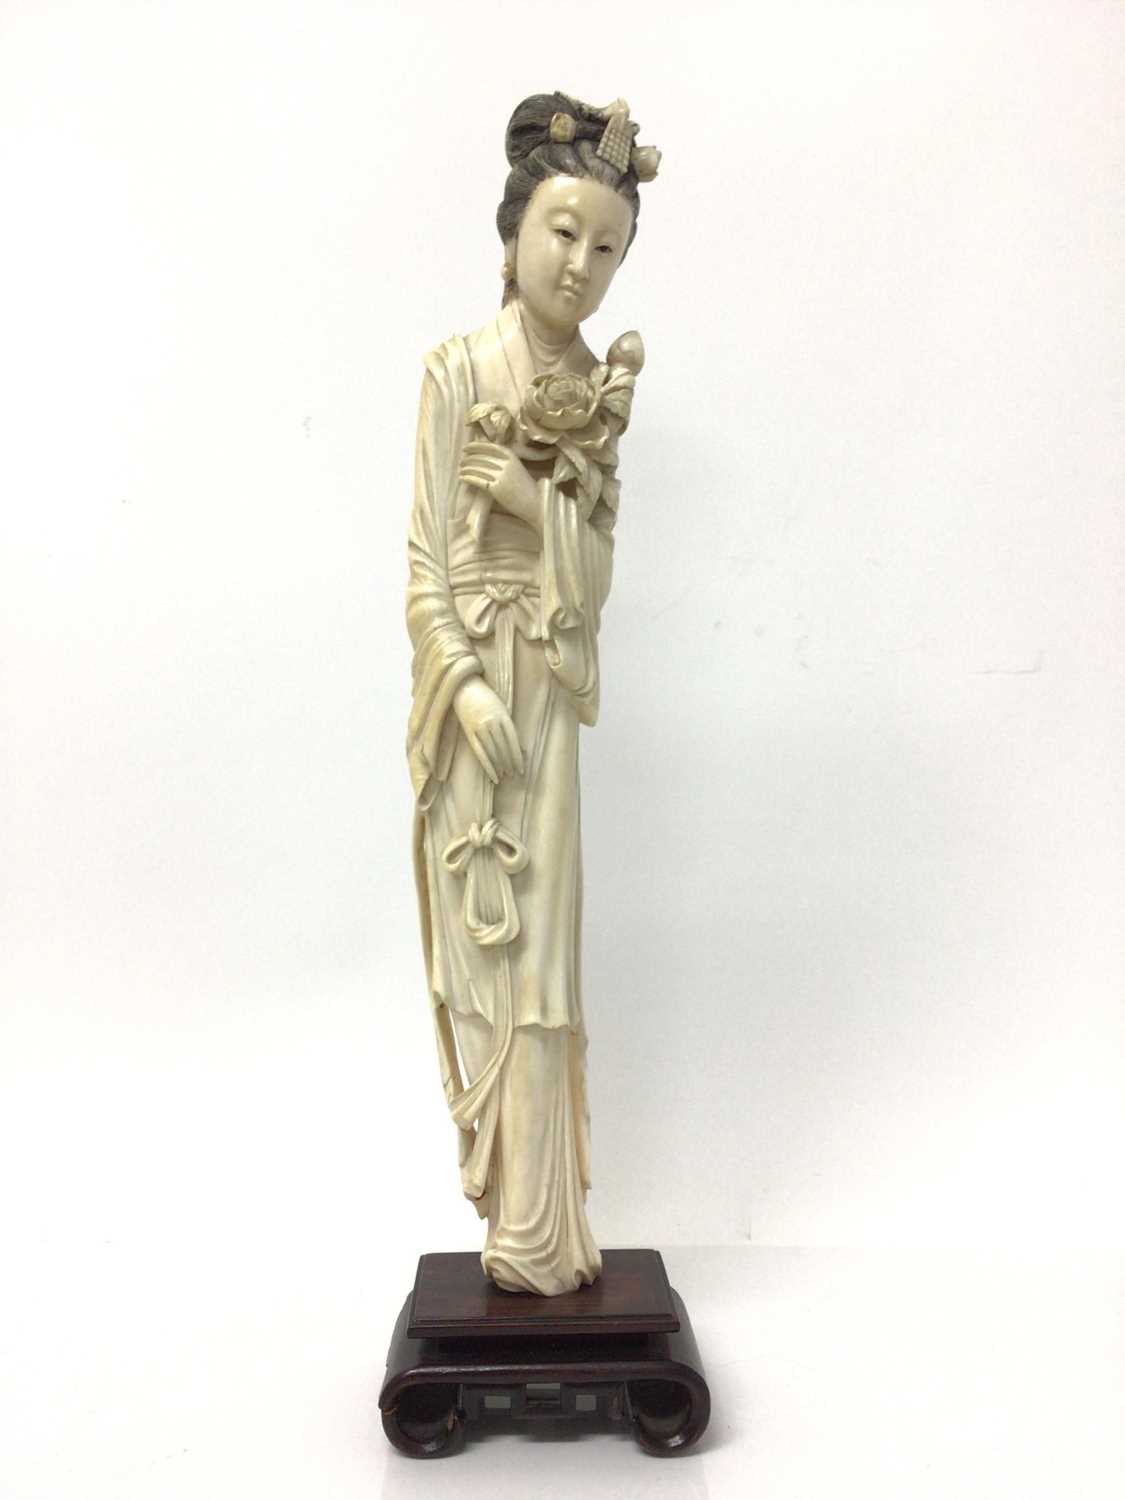 Large 19th century Japanese ivory tusk figure of a woman, shown wearing a long robe and holding flow